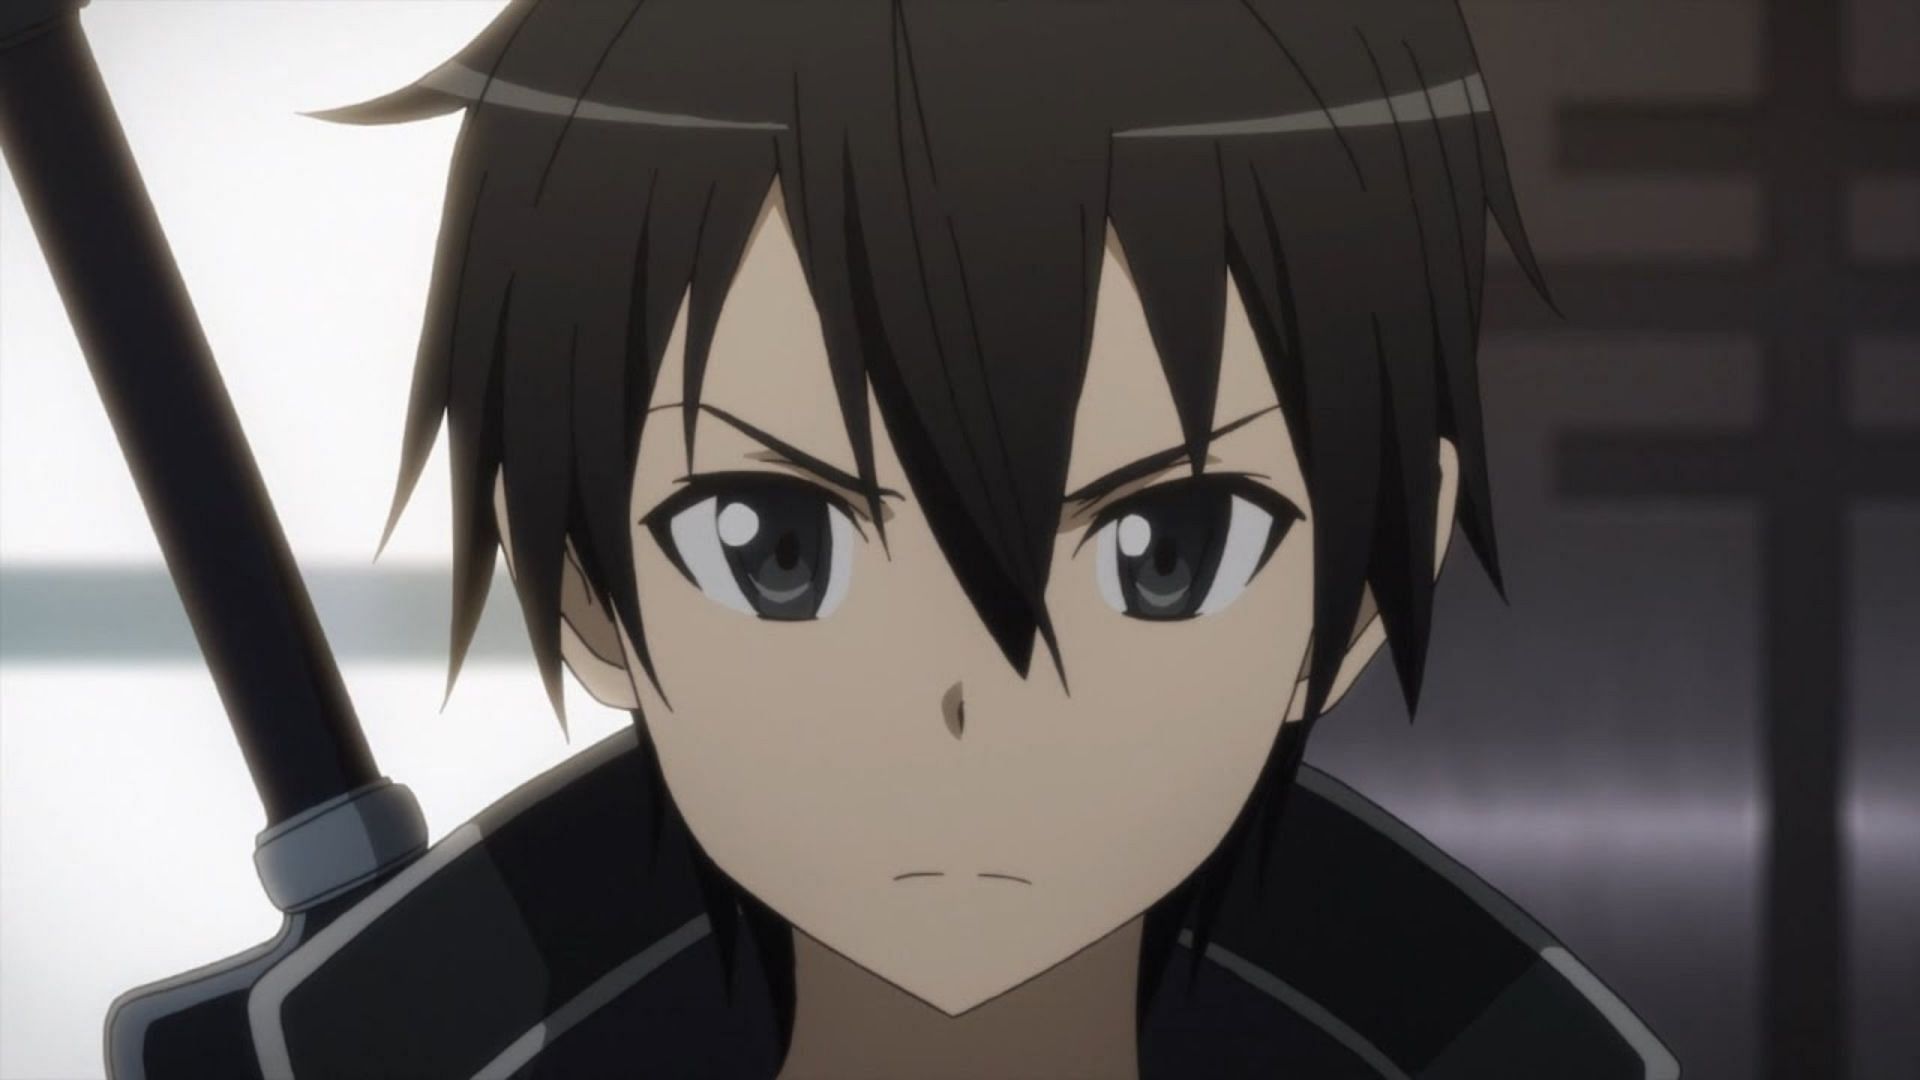 Kirito as seen in the anime (Image via A-1 Pictures)